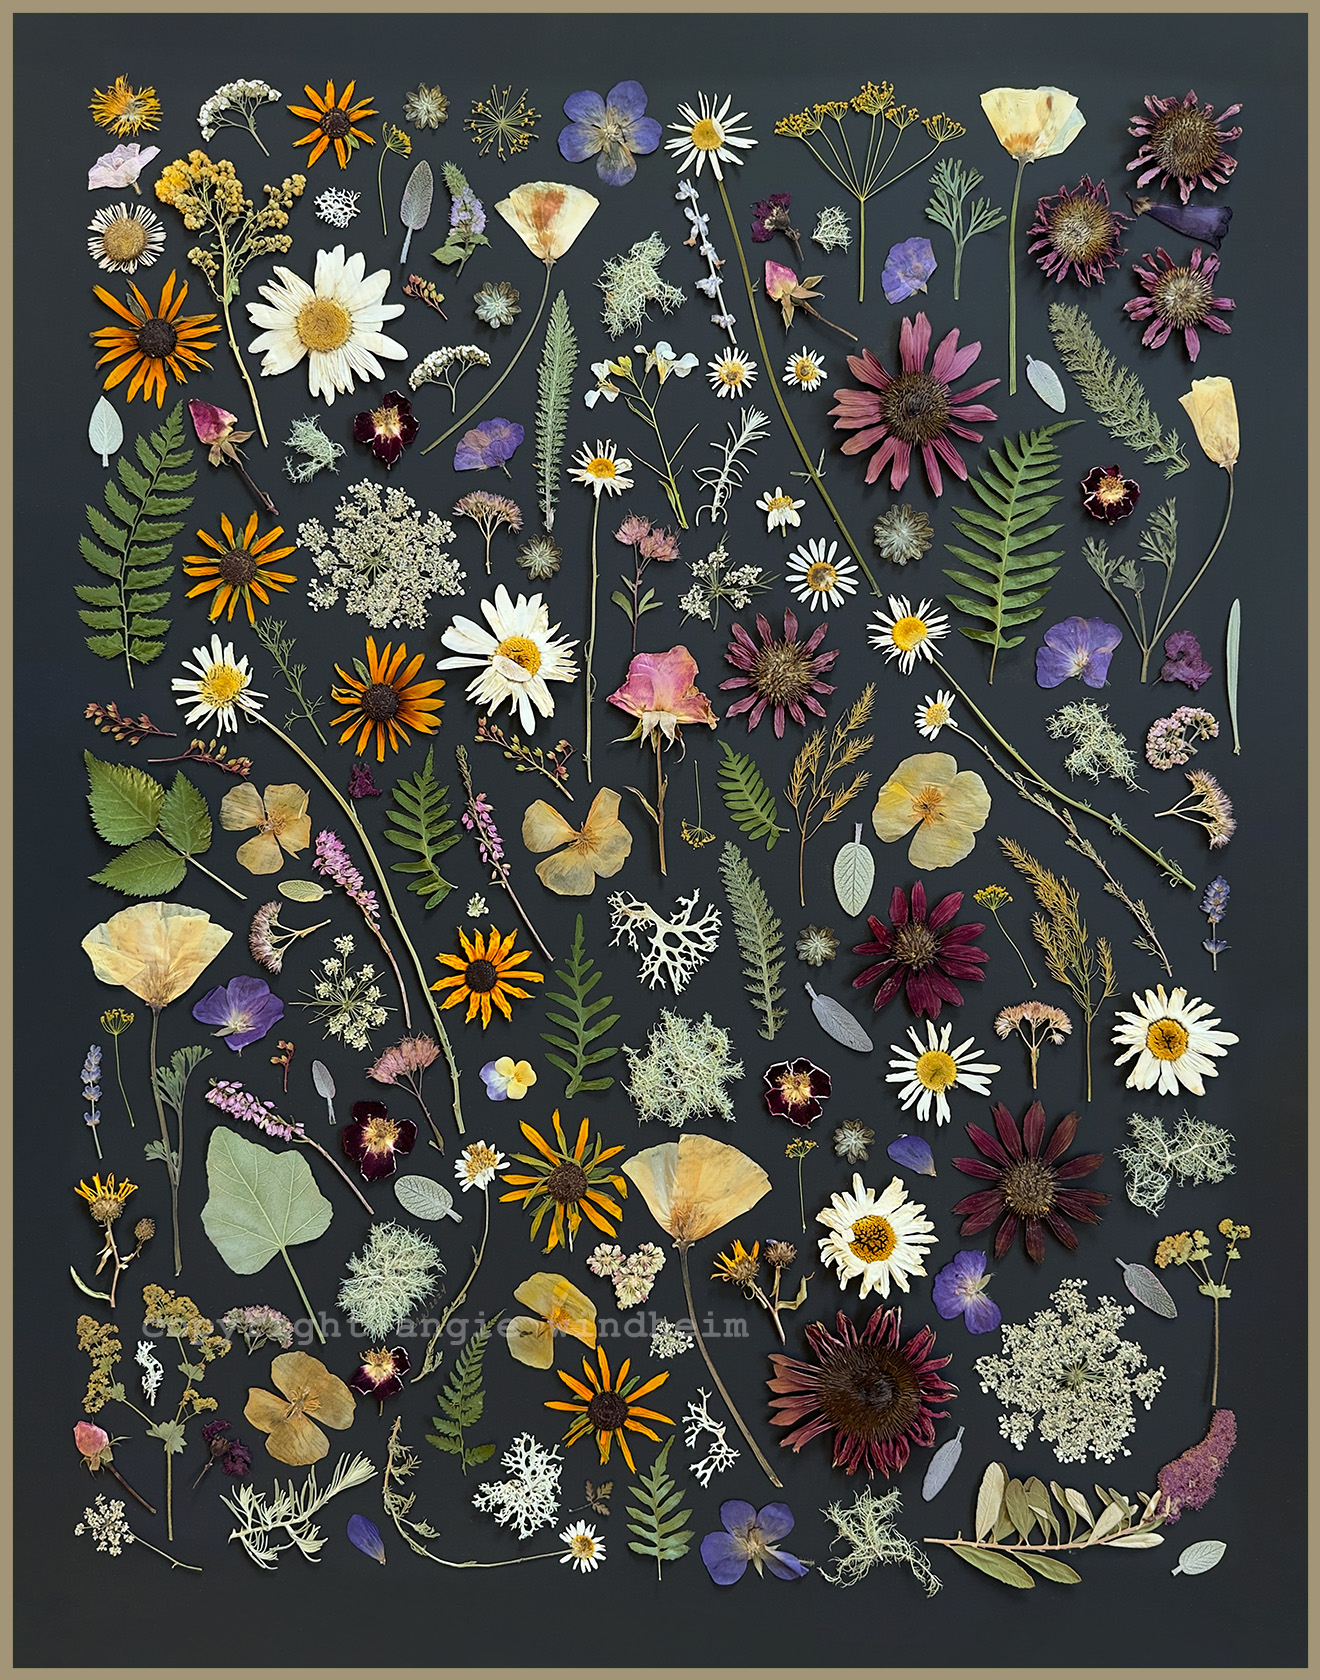 "Rose City" is a pressed flower collage on black paper by Angie Windheim for Kindness Roots. A pink rose is surrounded by a wide assortment of flowers and foliage.